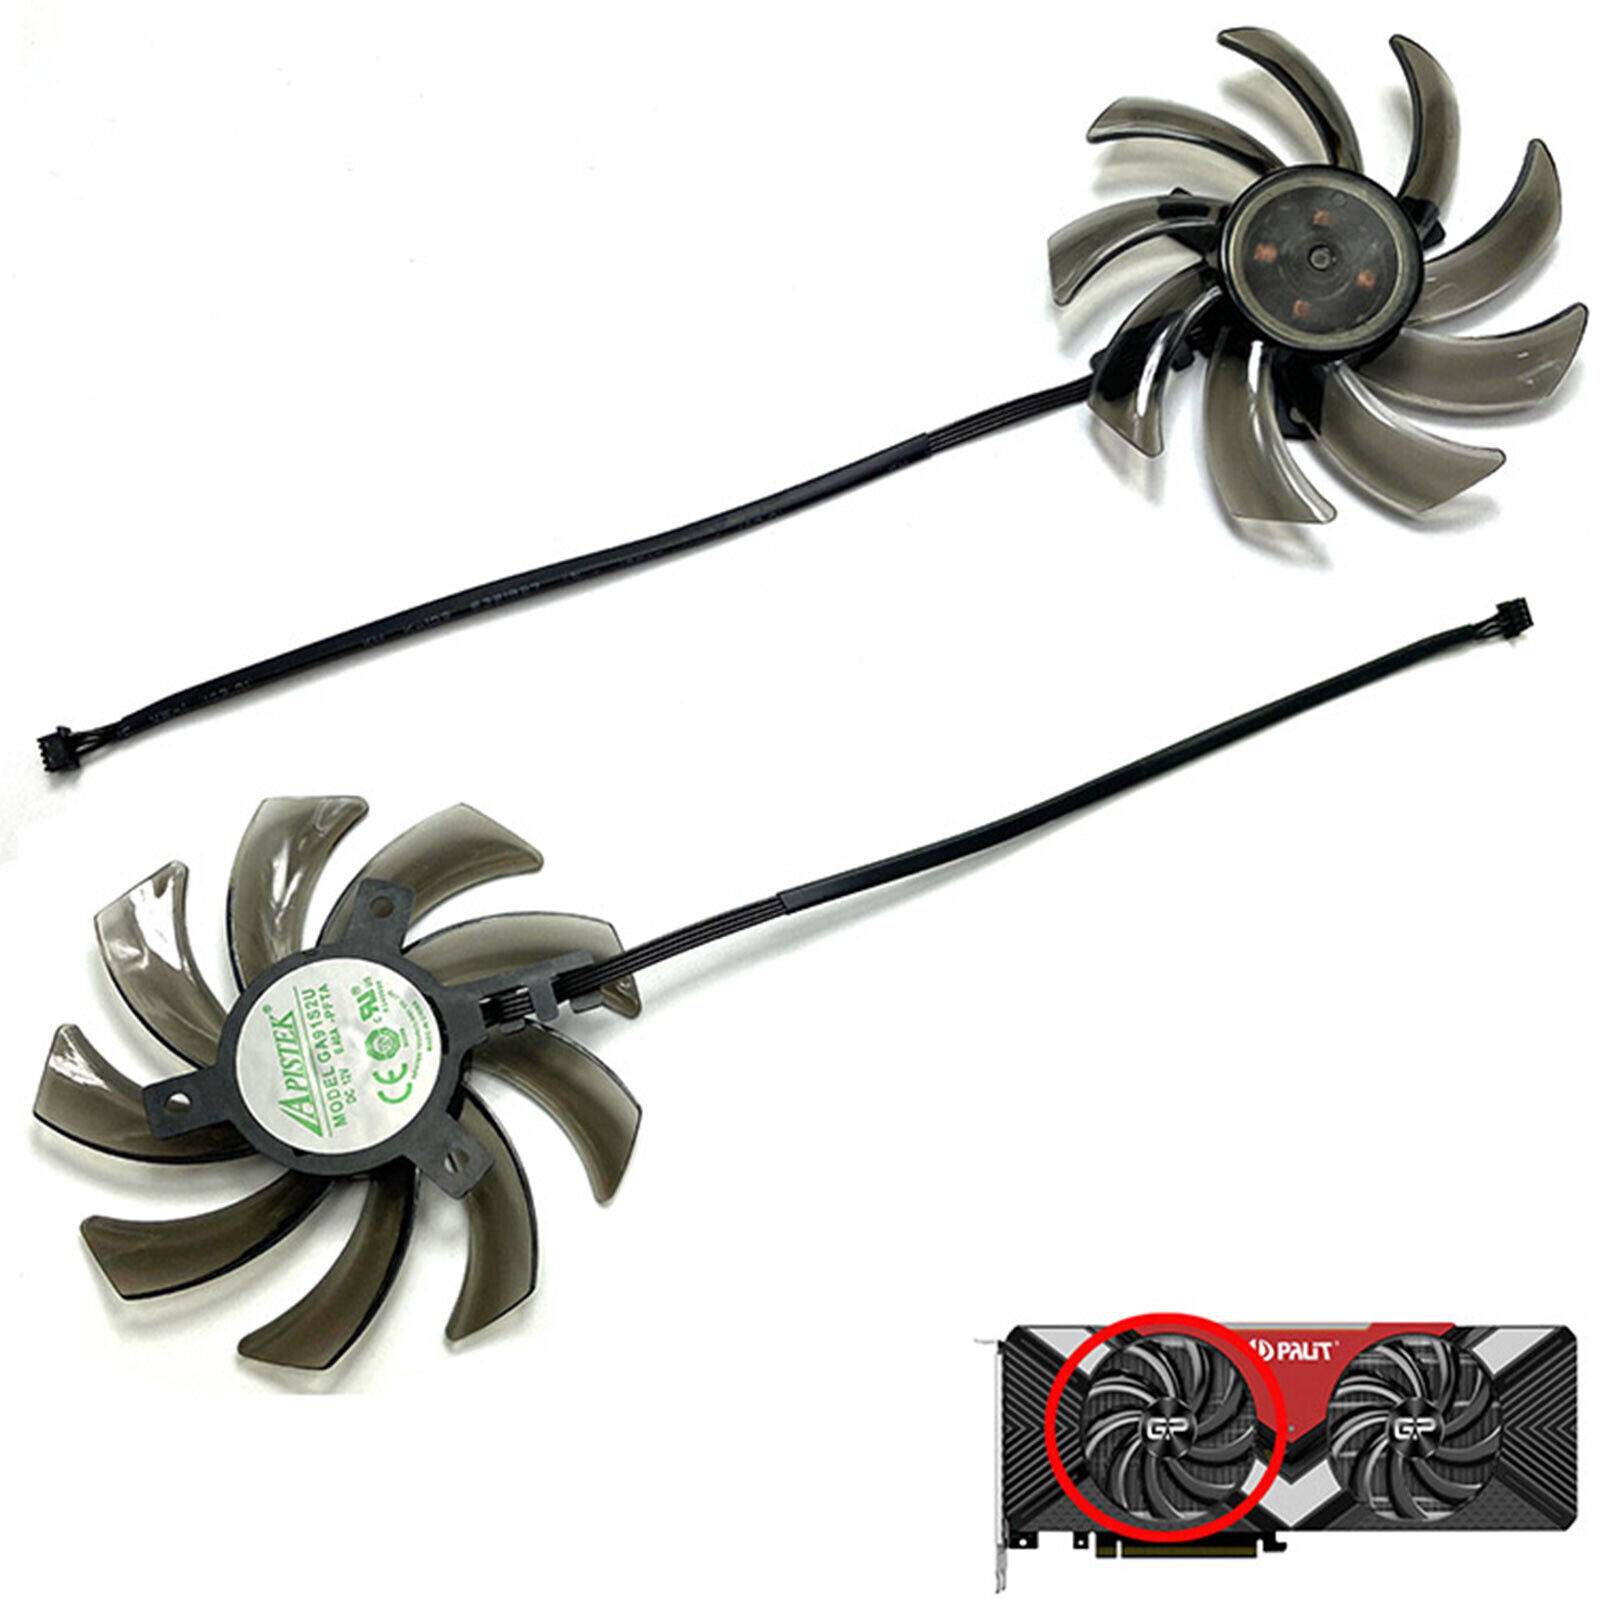 1 Set Graphics Card Cooling Fan for PNY PALiT RTX2070 2080 GAMING PRO/DUAL